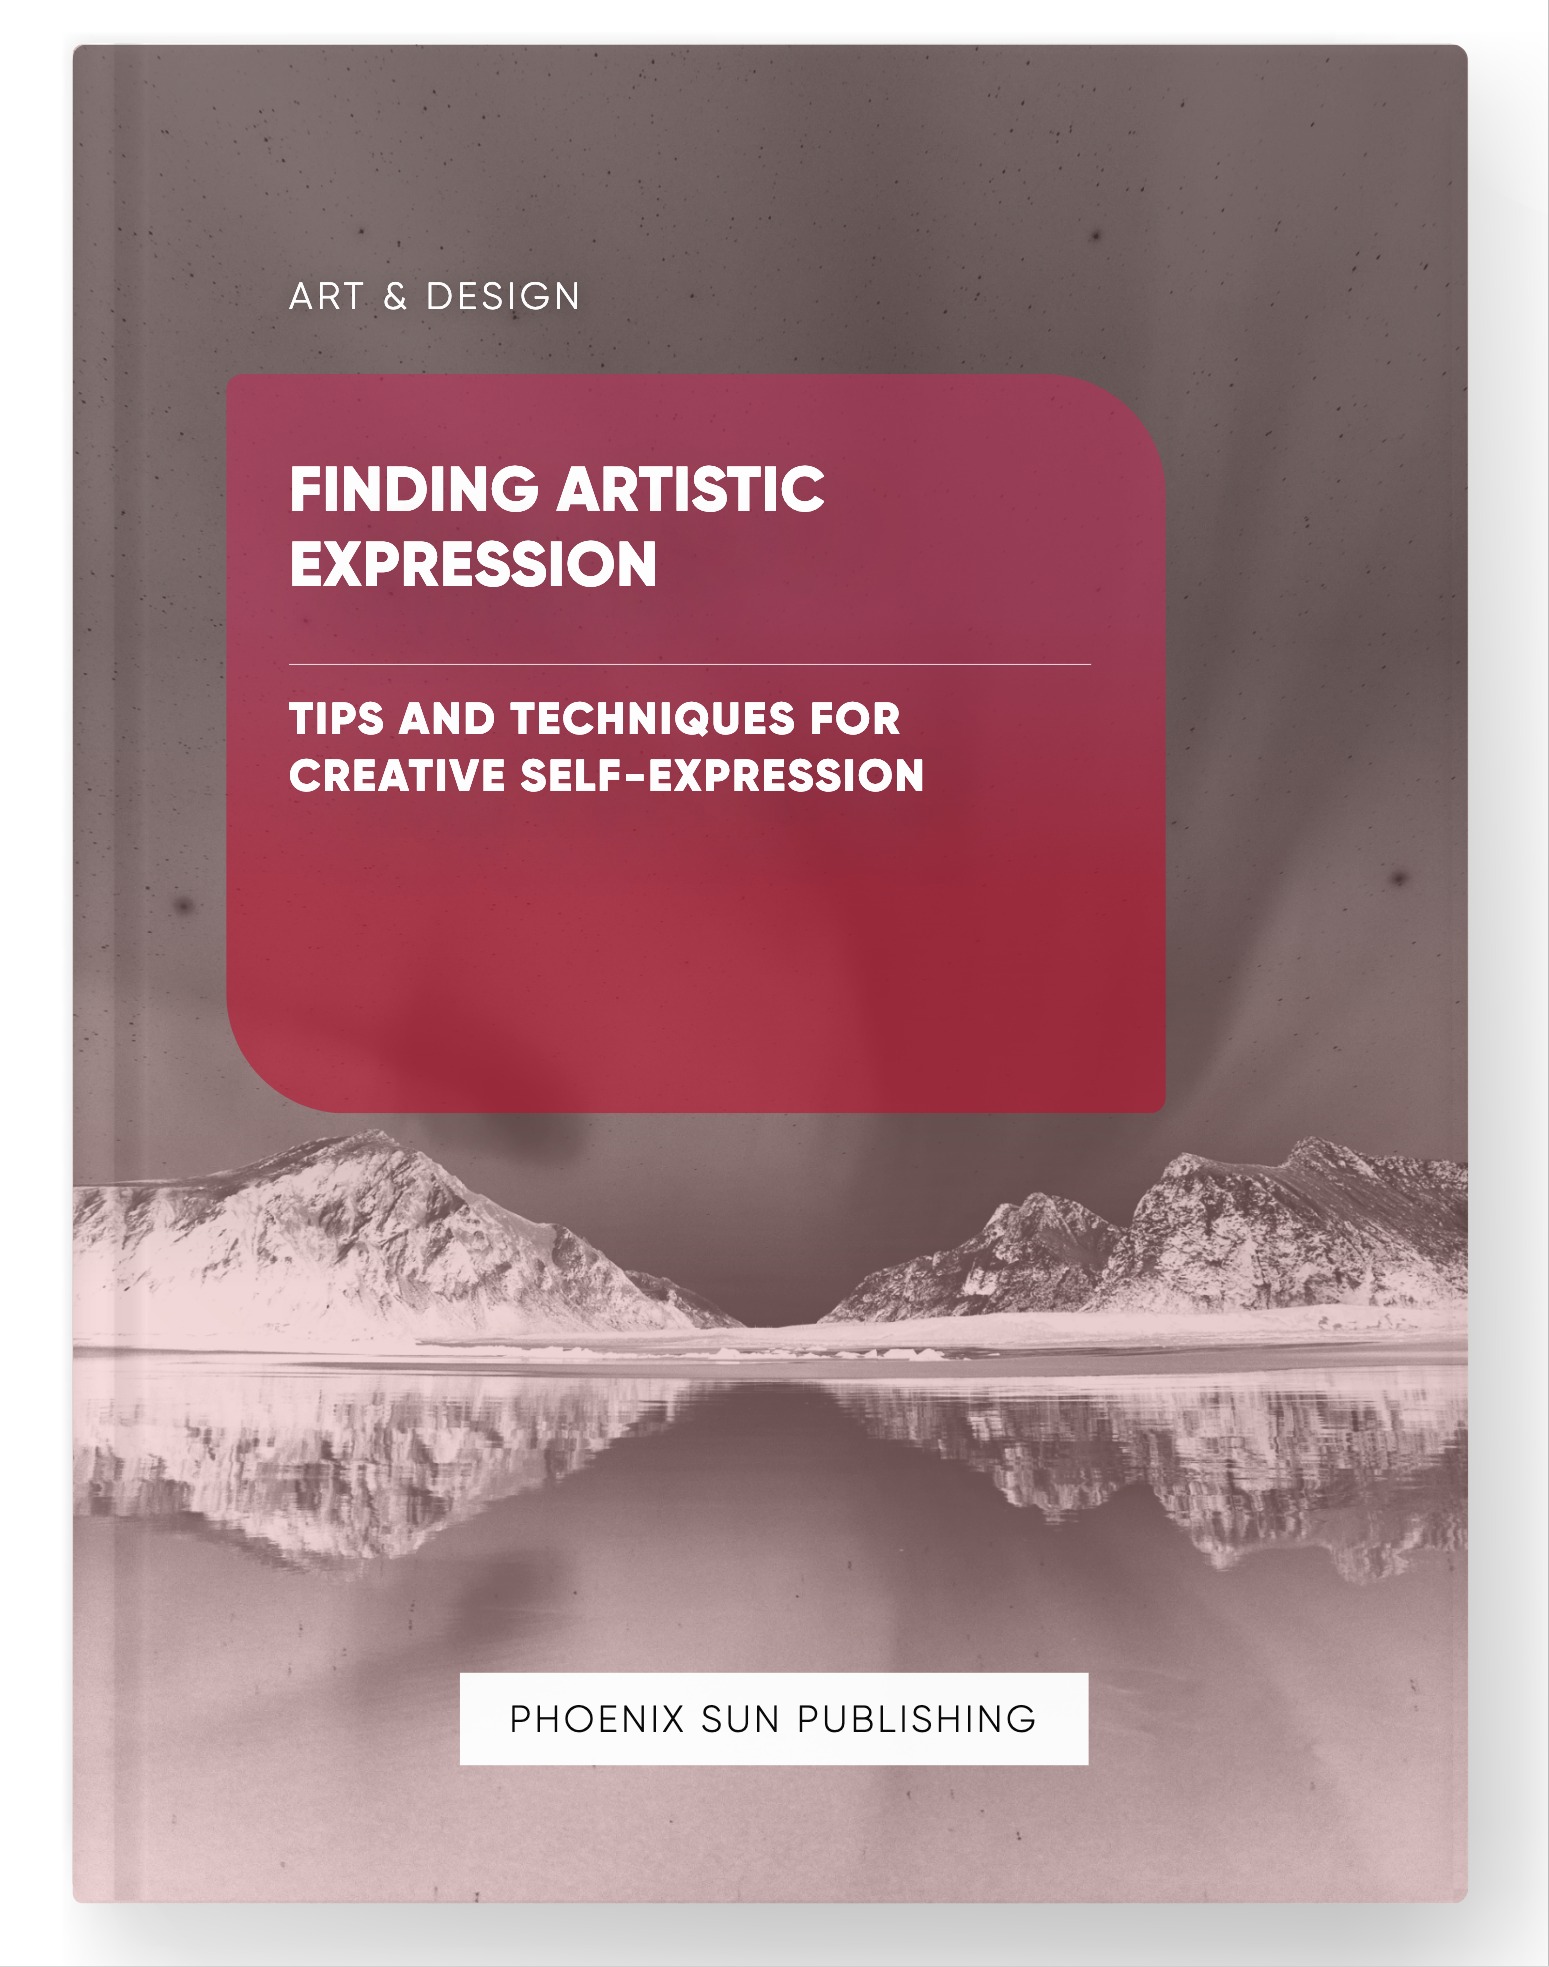 Finding Artistic Expression – Tips and Techniques for Creative Self-Expression